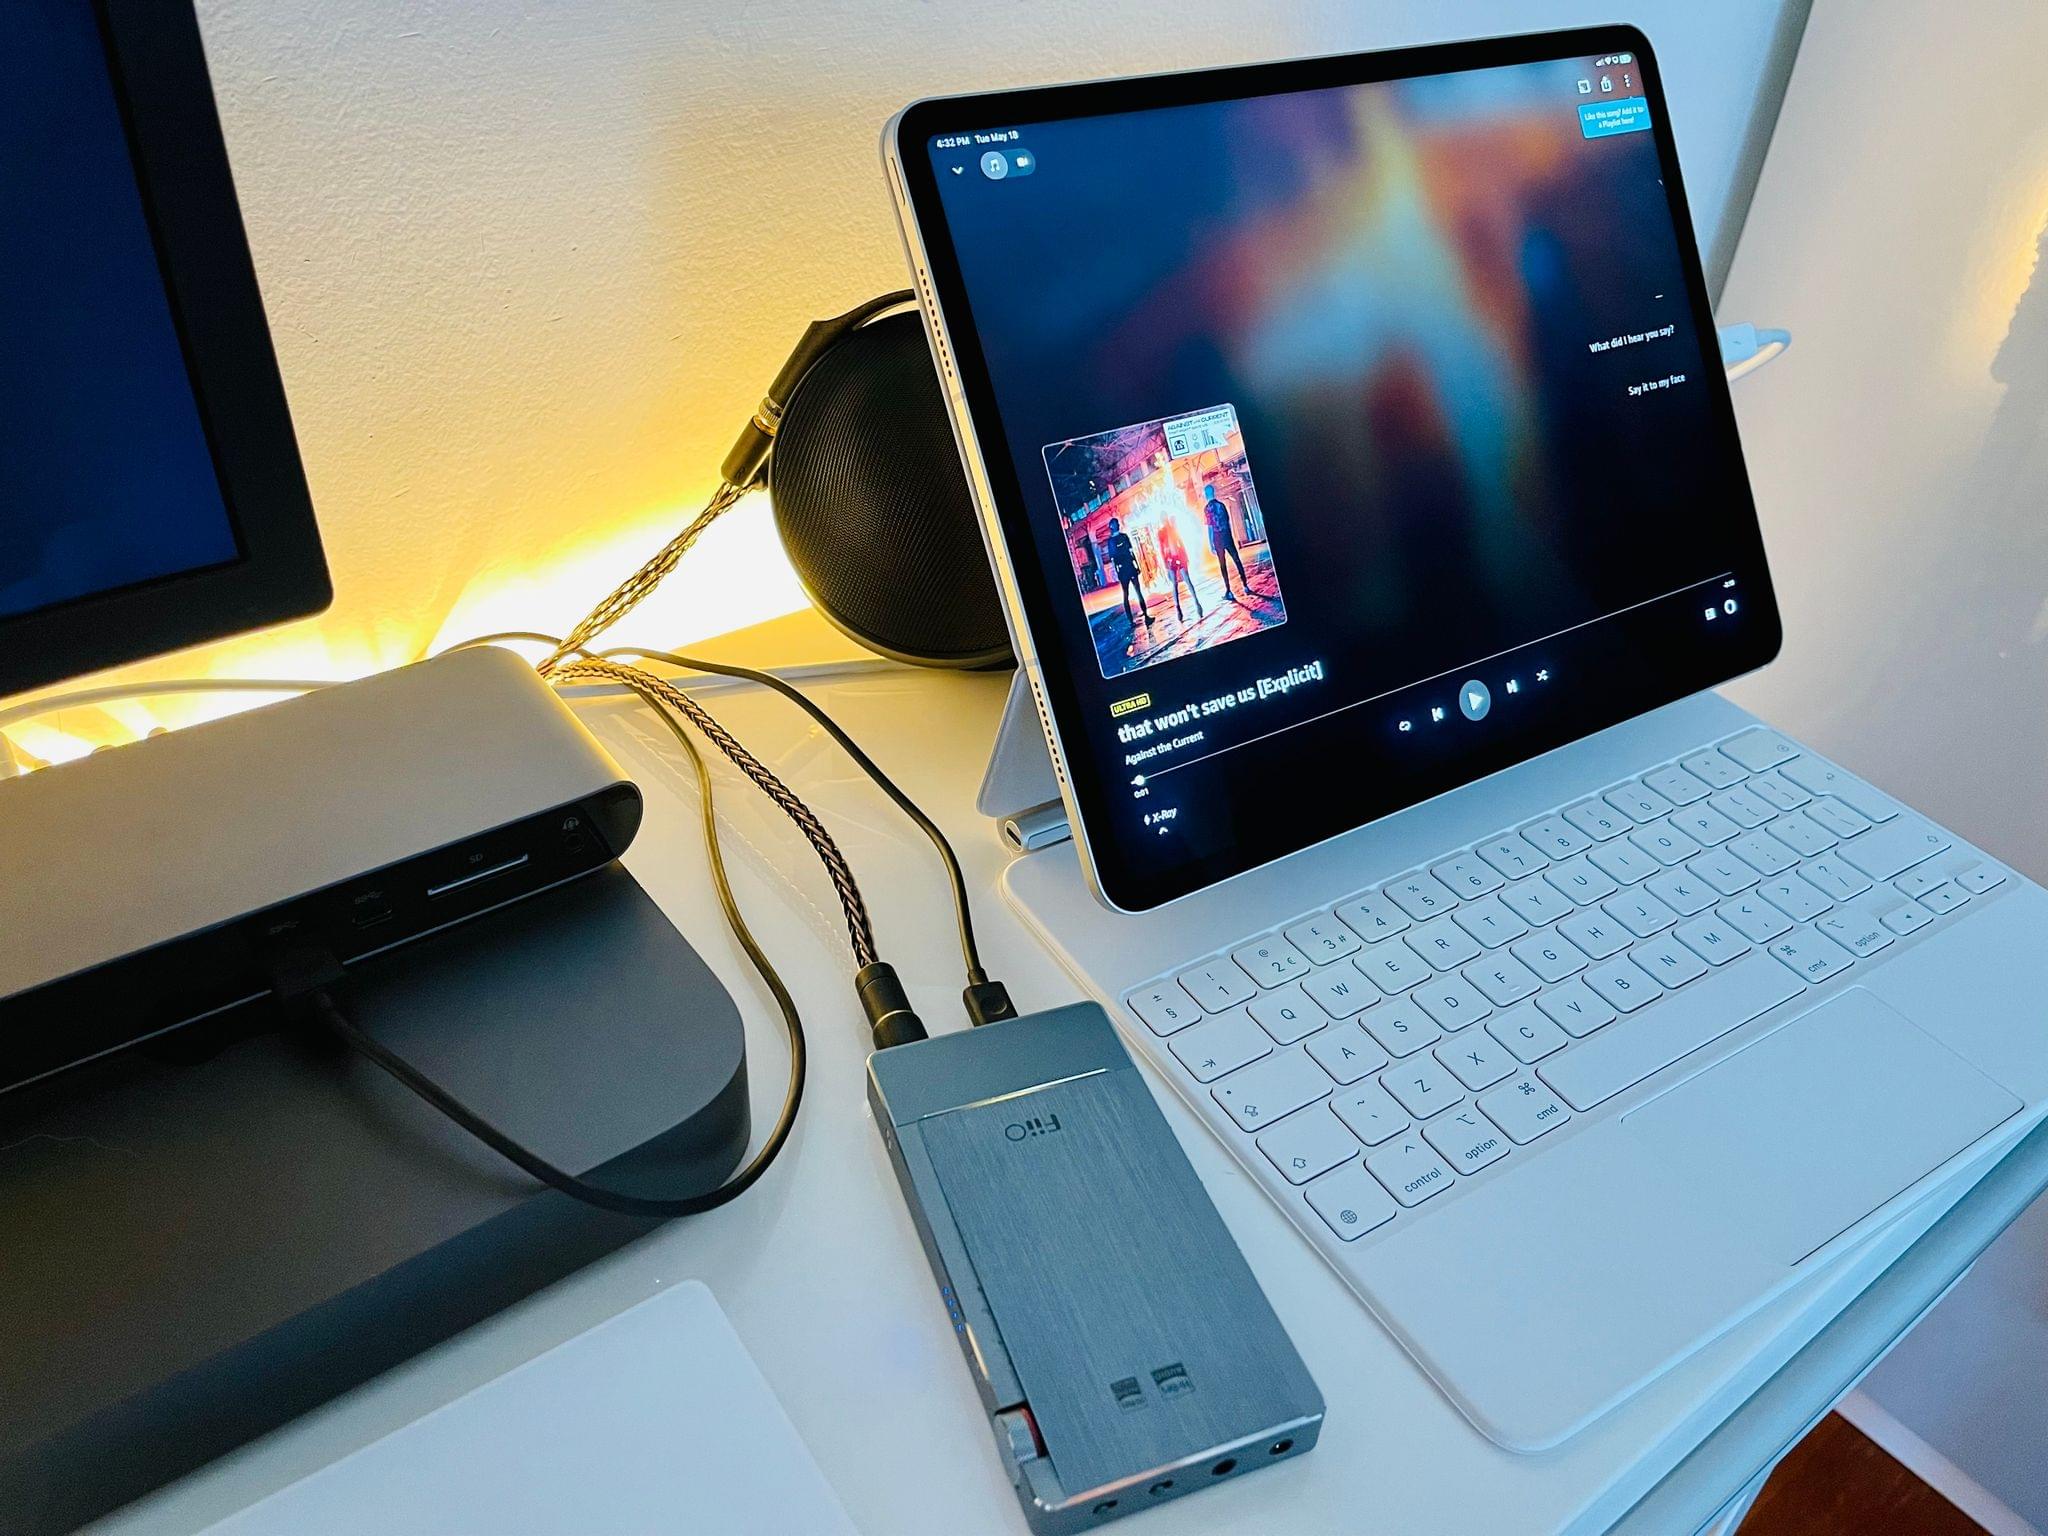 Headphones are plugged with a balanced cable into my FiiO DAC, which is plugged into the Thunderbolt dock, which is connected to the iPad Pro and UltraFine 4K display. I love this setup.